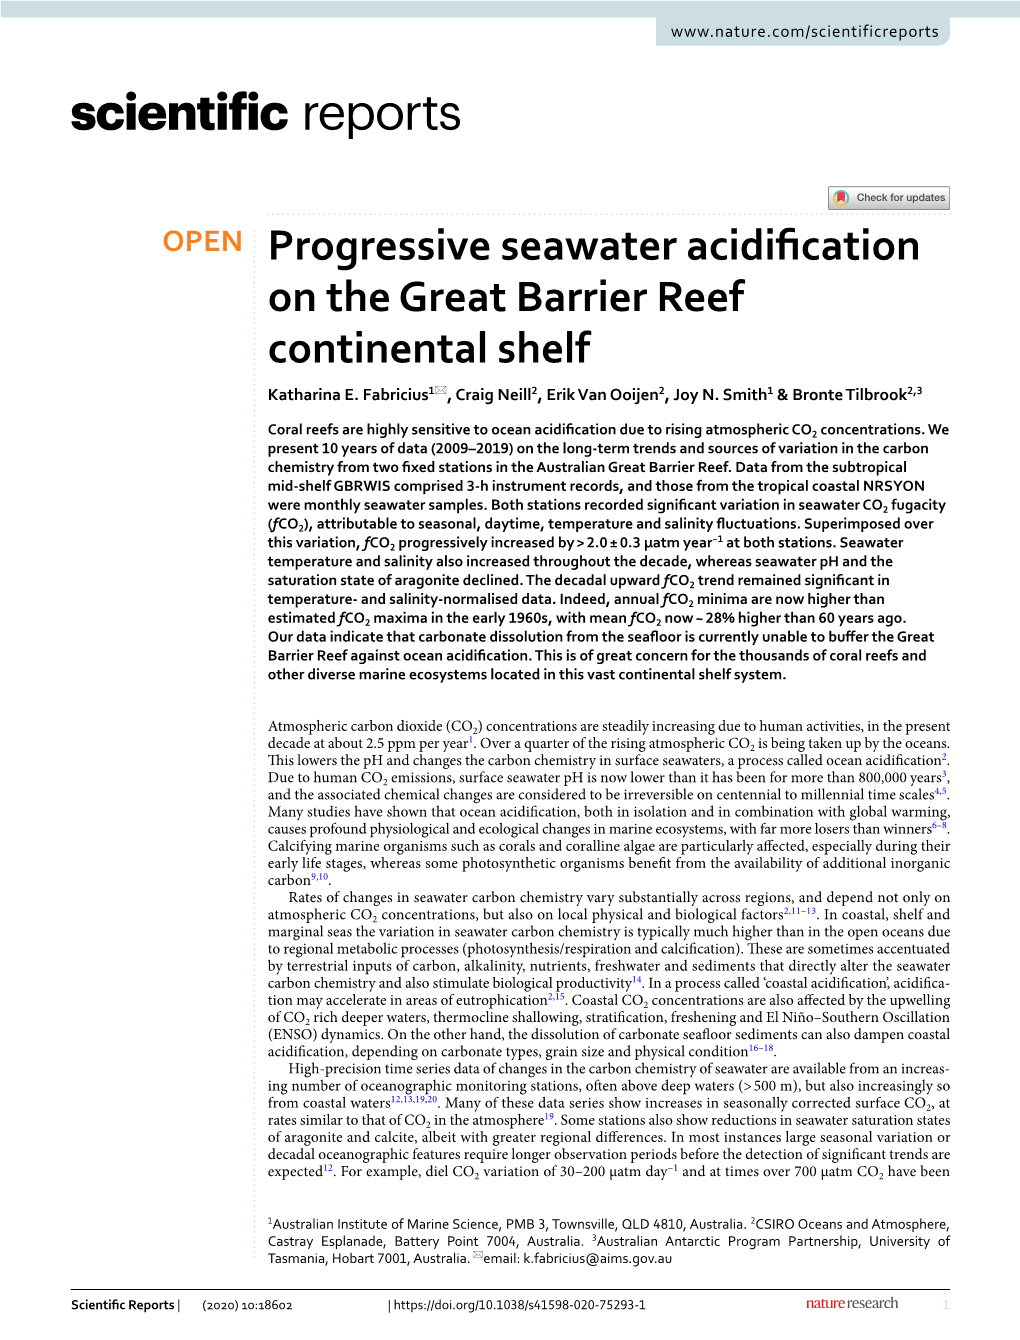 Progressive Seawater Acidification on the Great Barrier Reef Continental